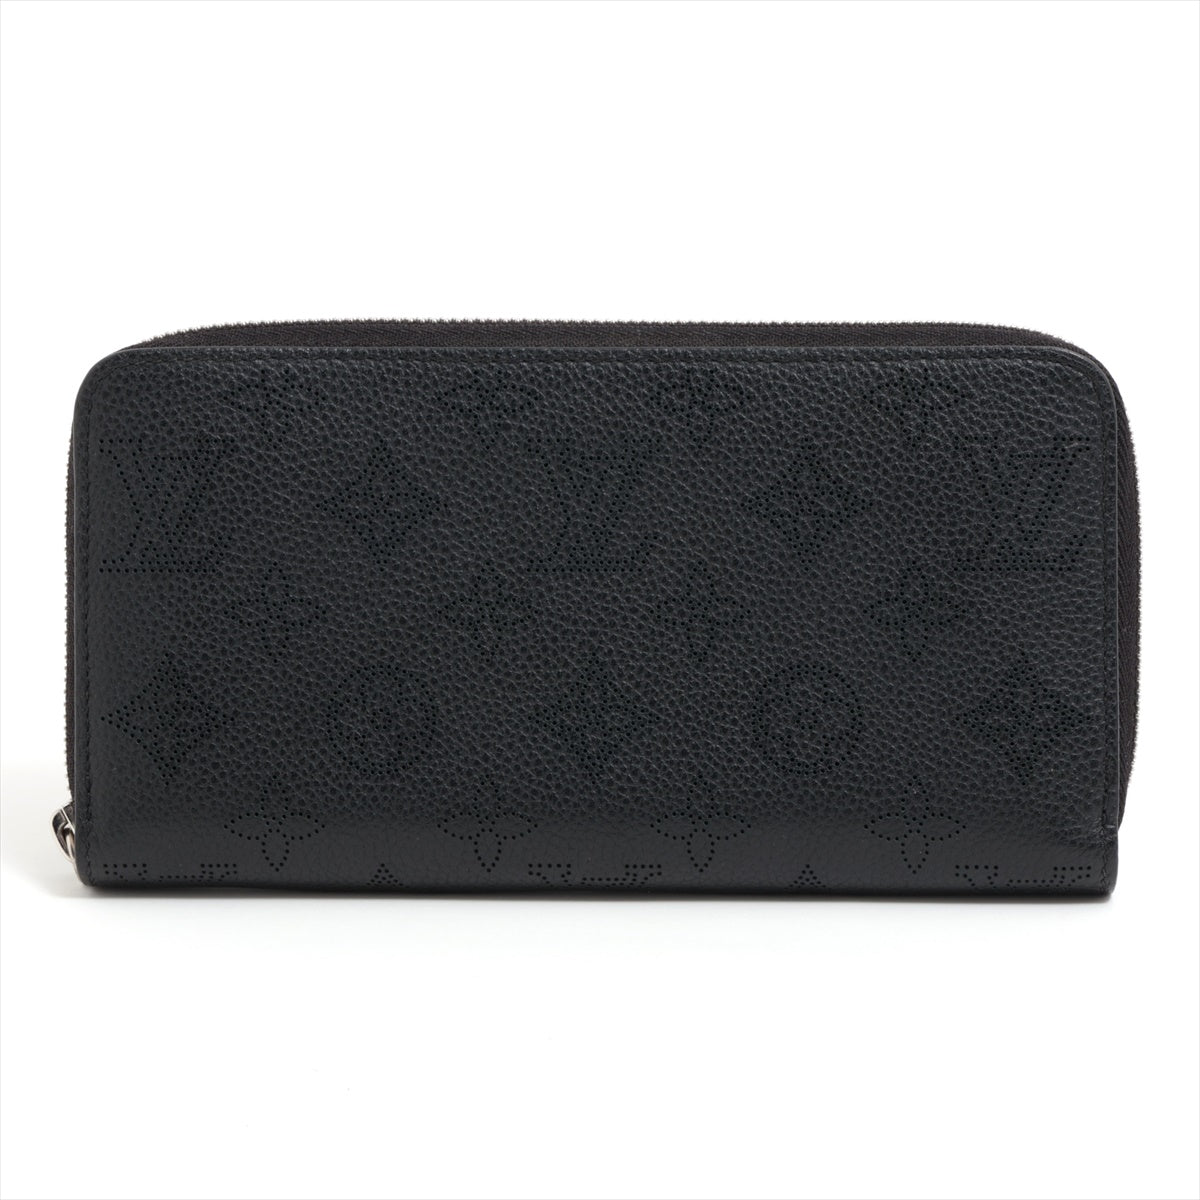 Louis Vuitton Mahina Zippy Wallet M61867 Noir Zip Round Wallet There was an RFID response